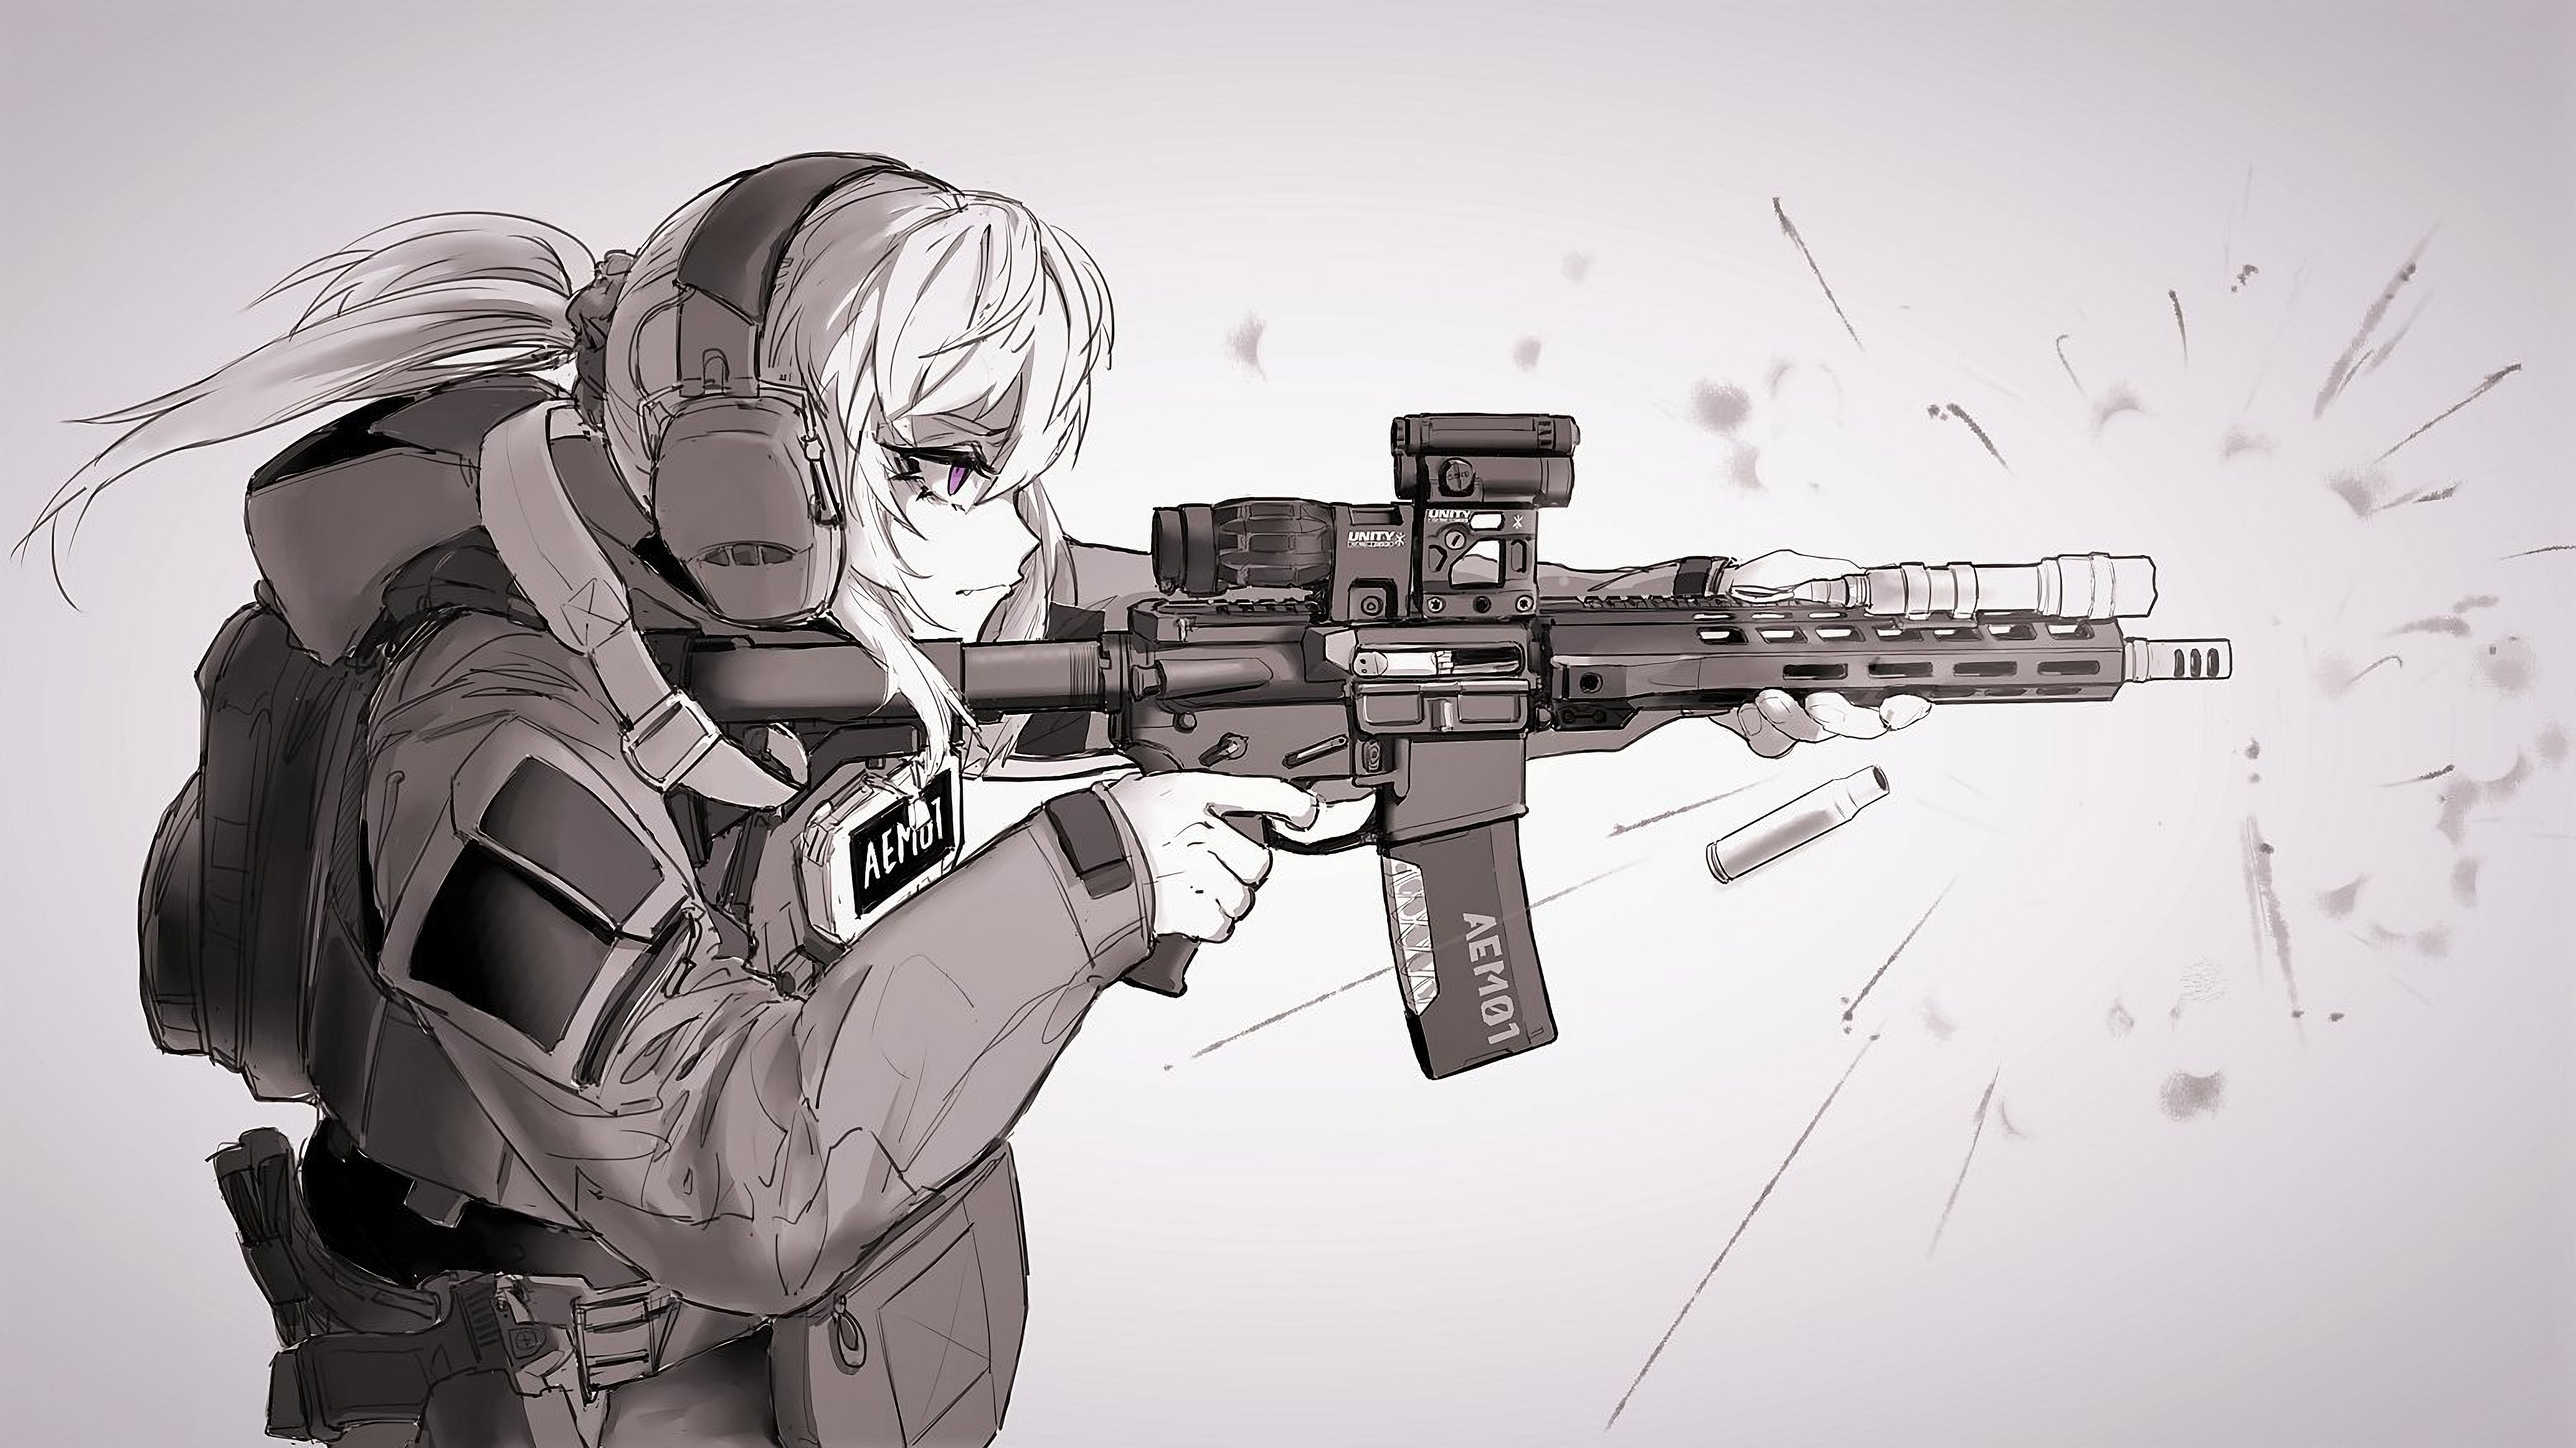 Girls' Frontline ArmaLite AR-15 AR-15 style rifle Assault rifle Anime,  military weapons, weapon, action Figure png | PNGEgg